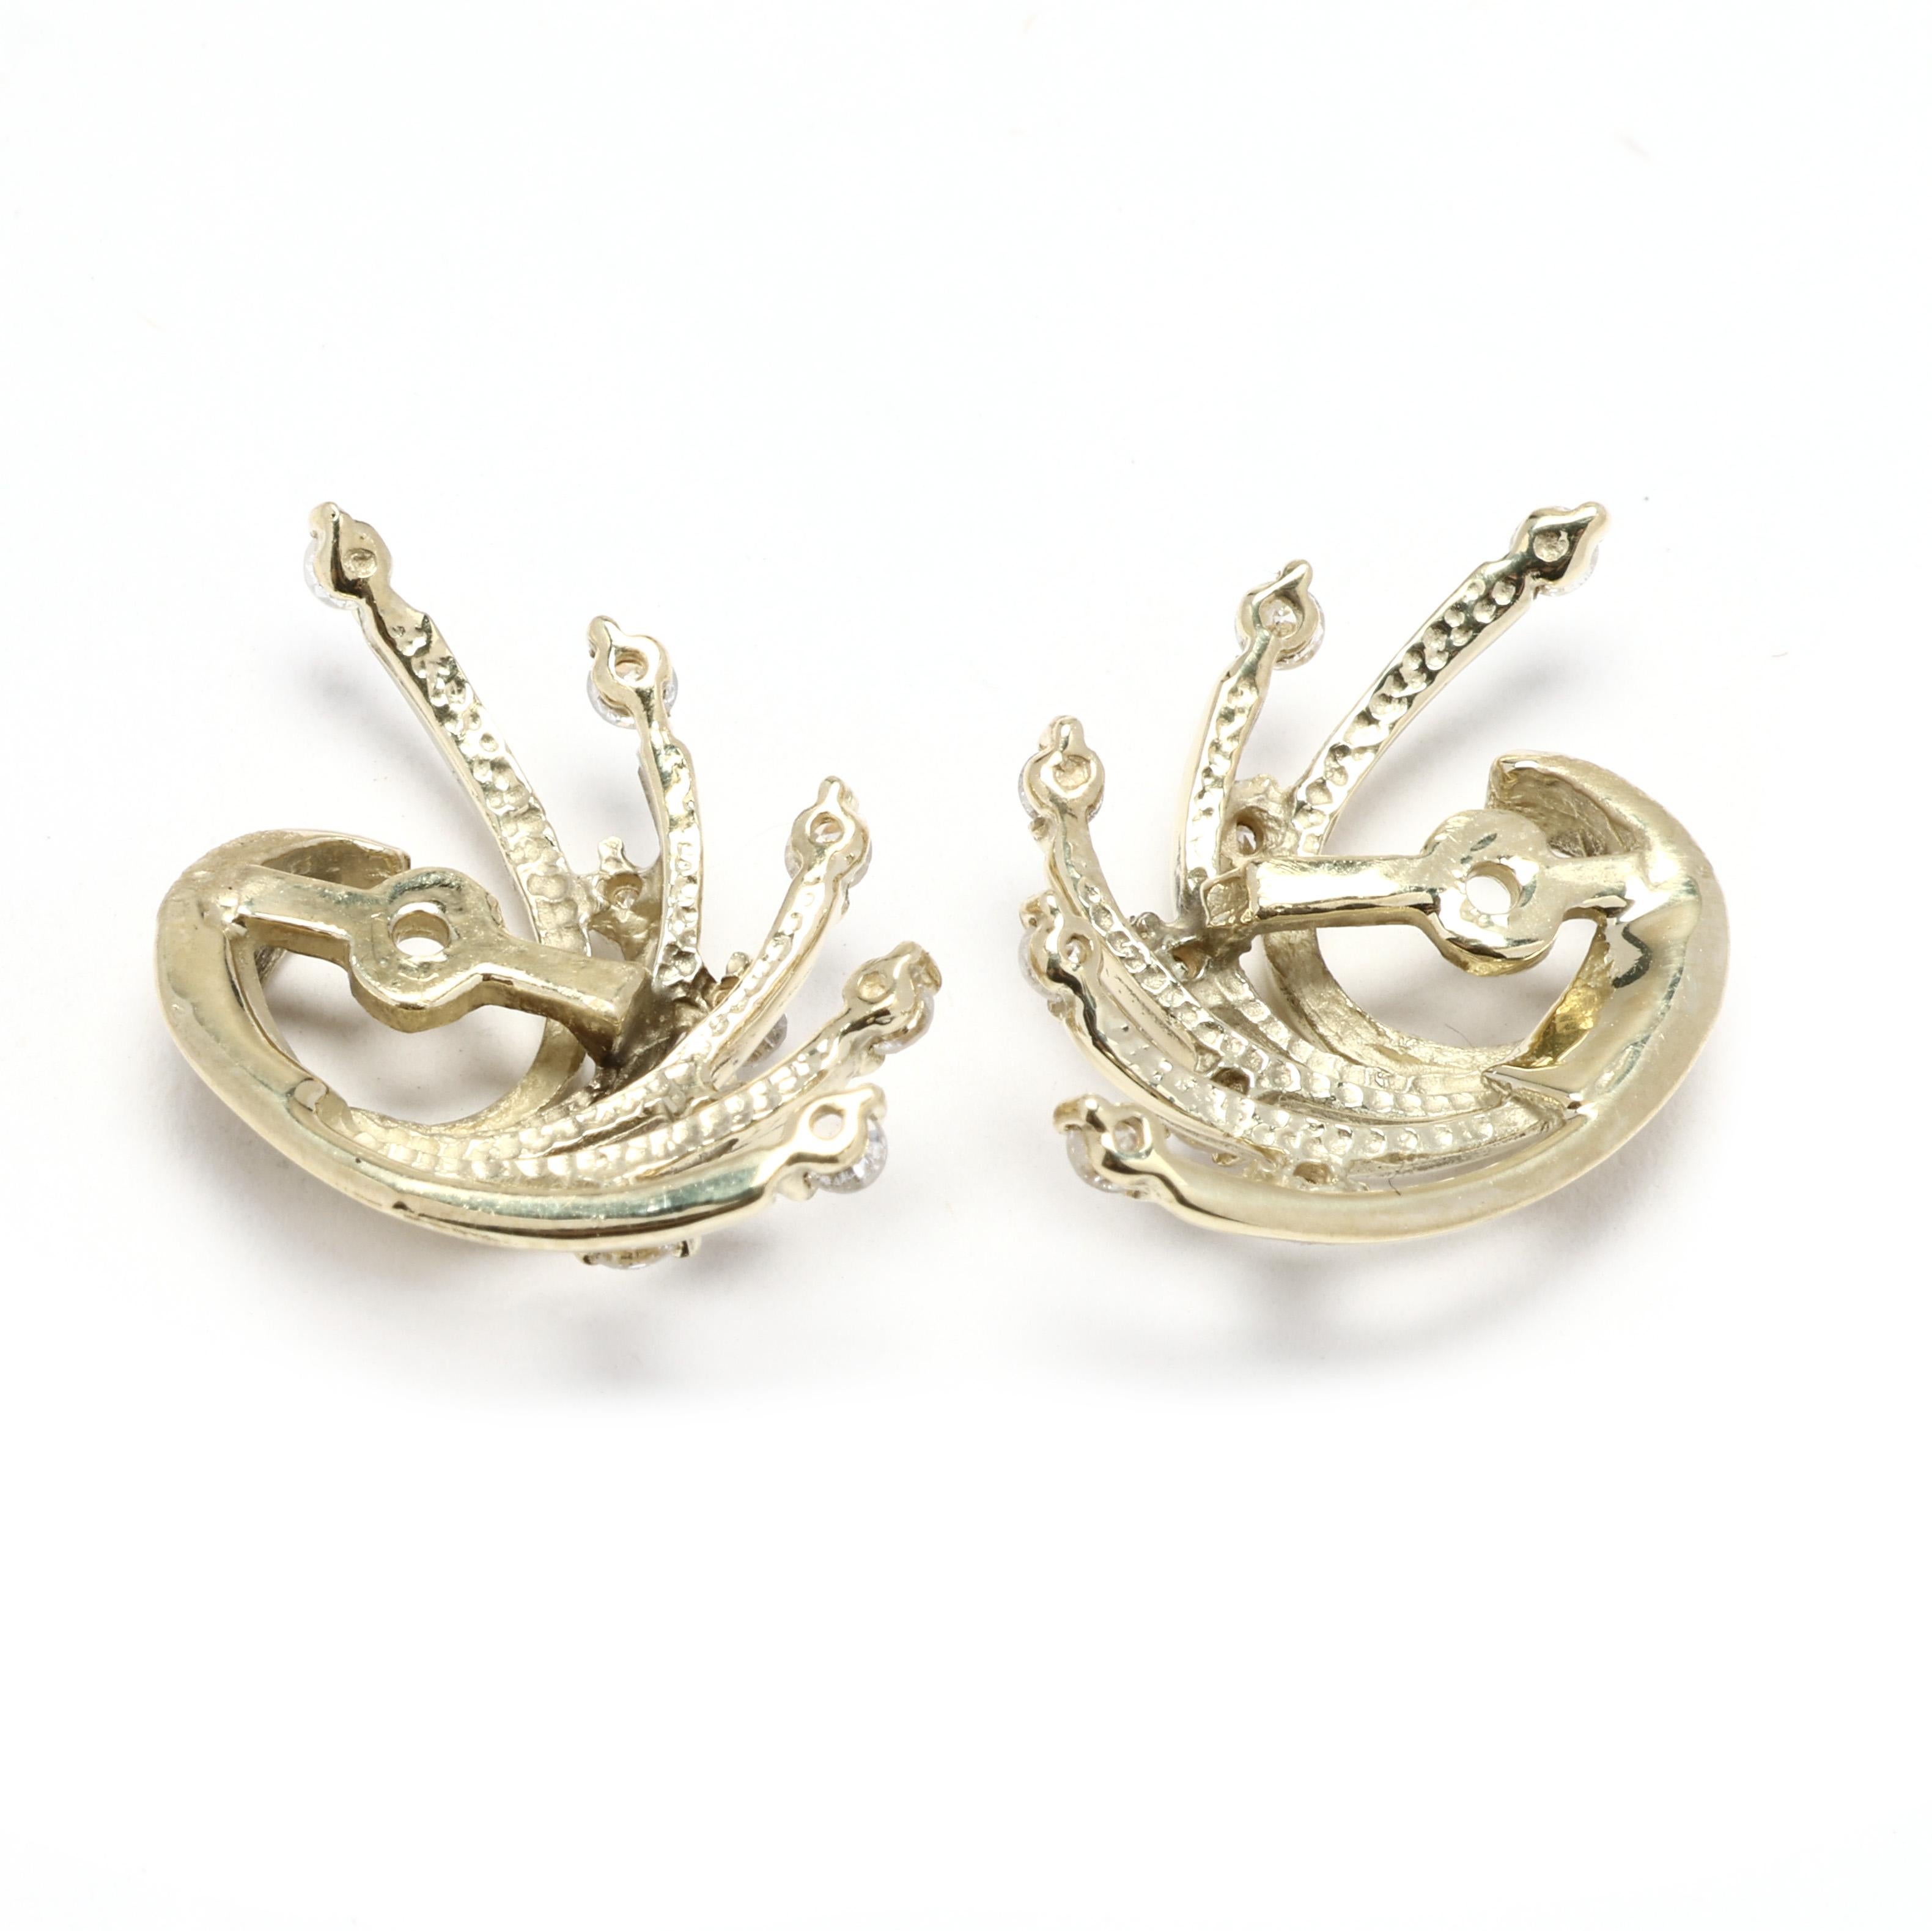 Brilliant Cut 0.36ctw Diamond and Gold Swirl Earring Jackets, 14k Yellow Gold, Length 0.62 In 